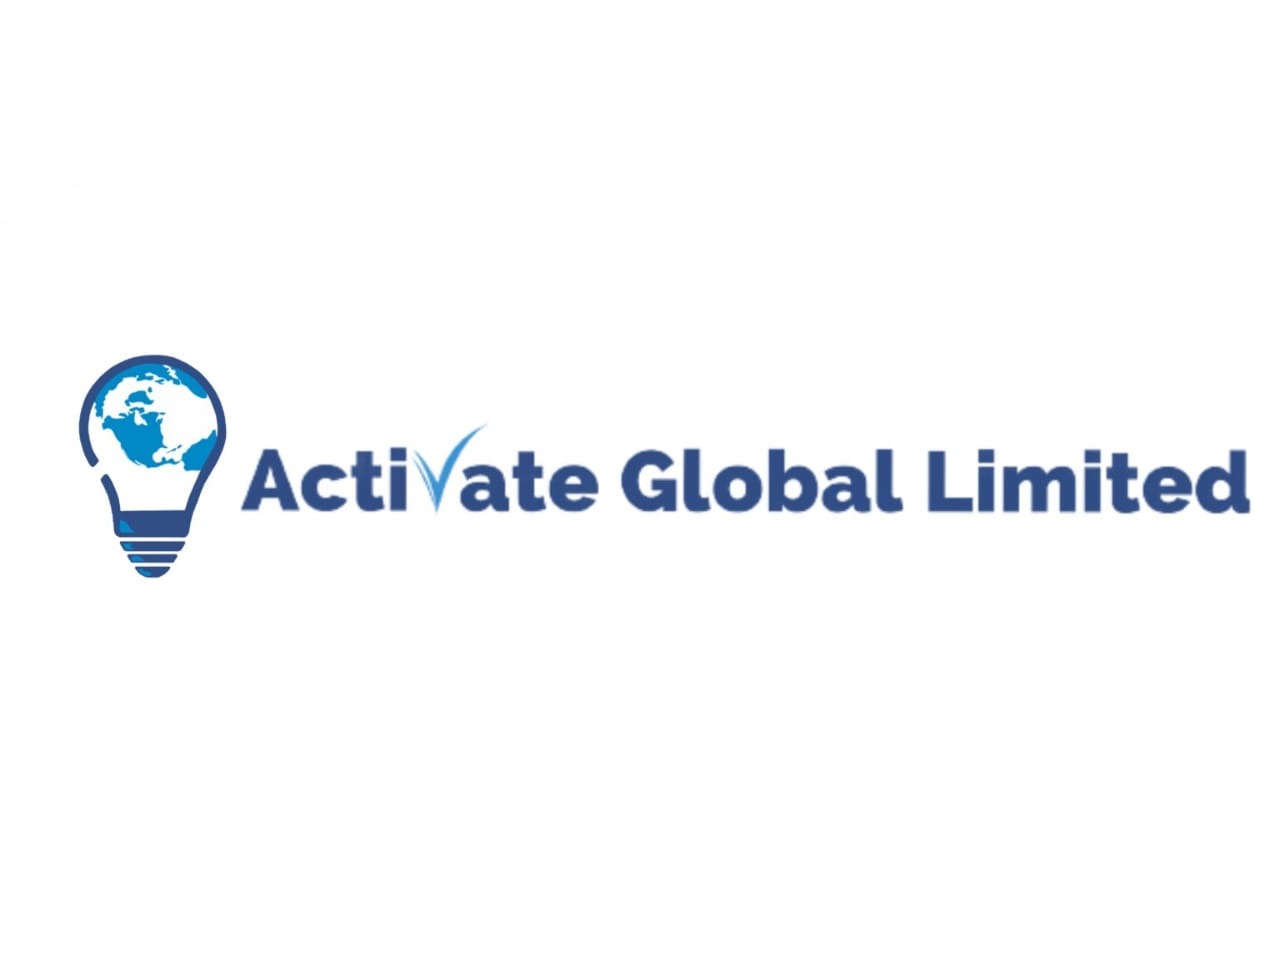 Activate Global Limited